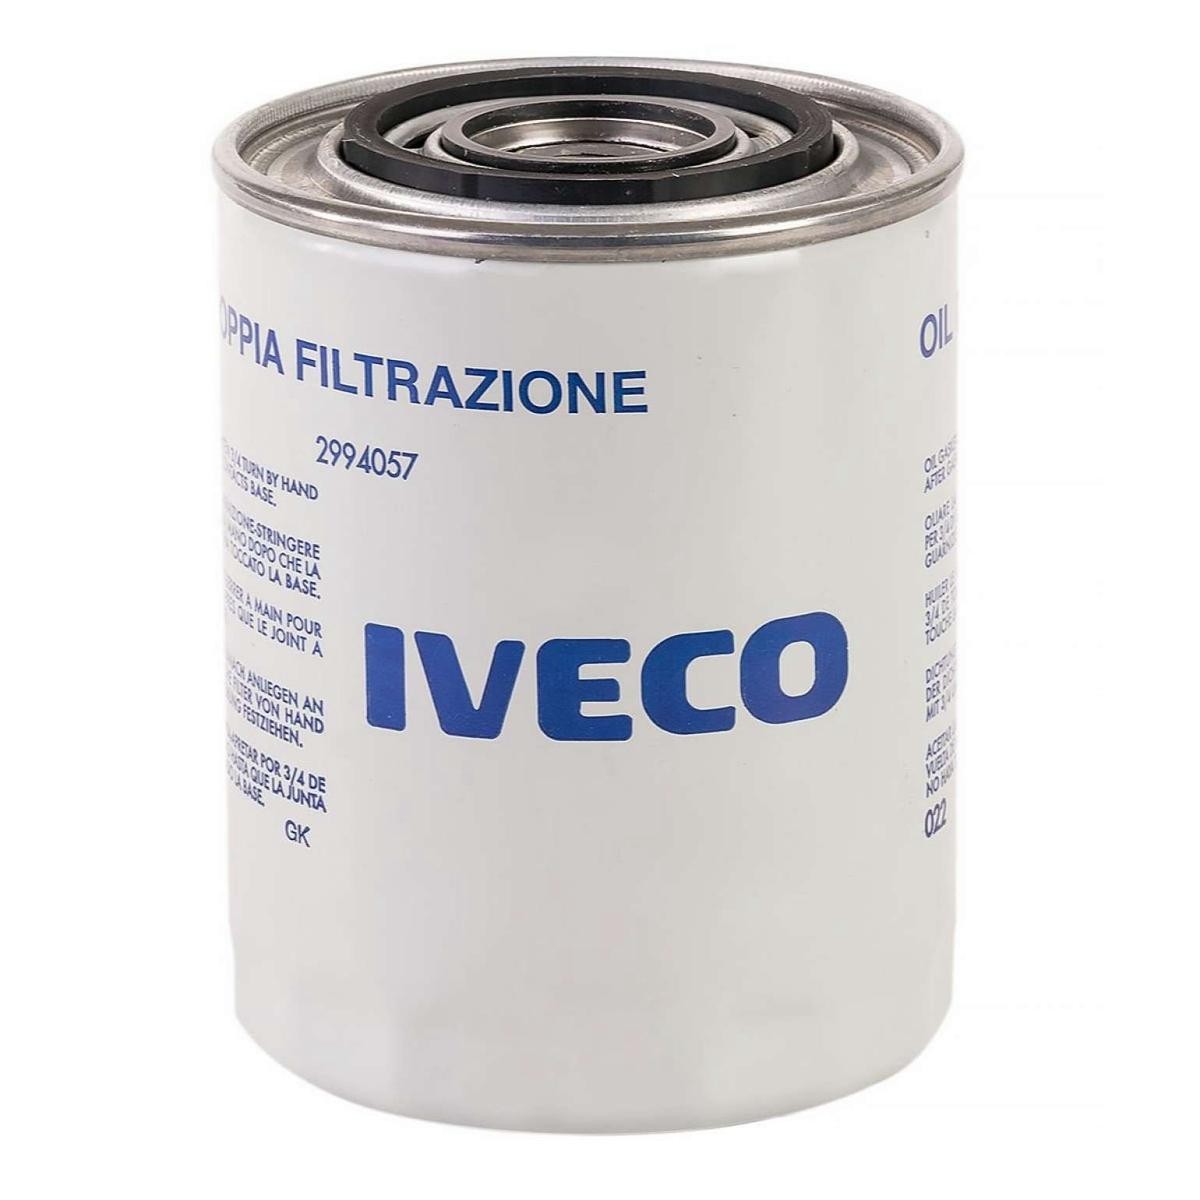 Engine oil filter IVECO Spin-on Filter - 2994057